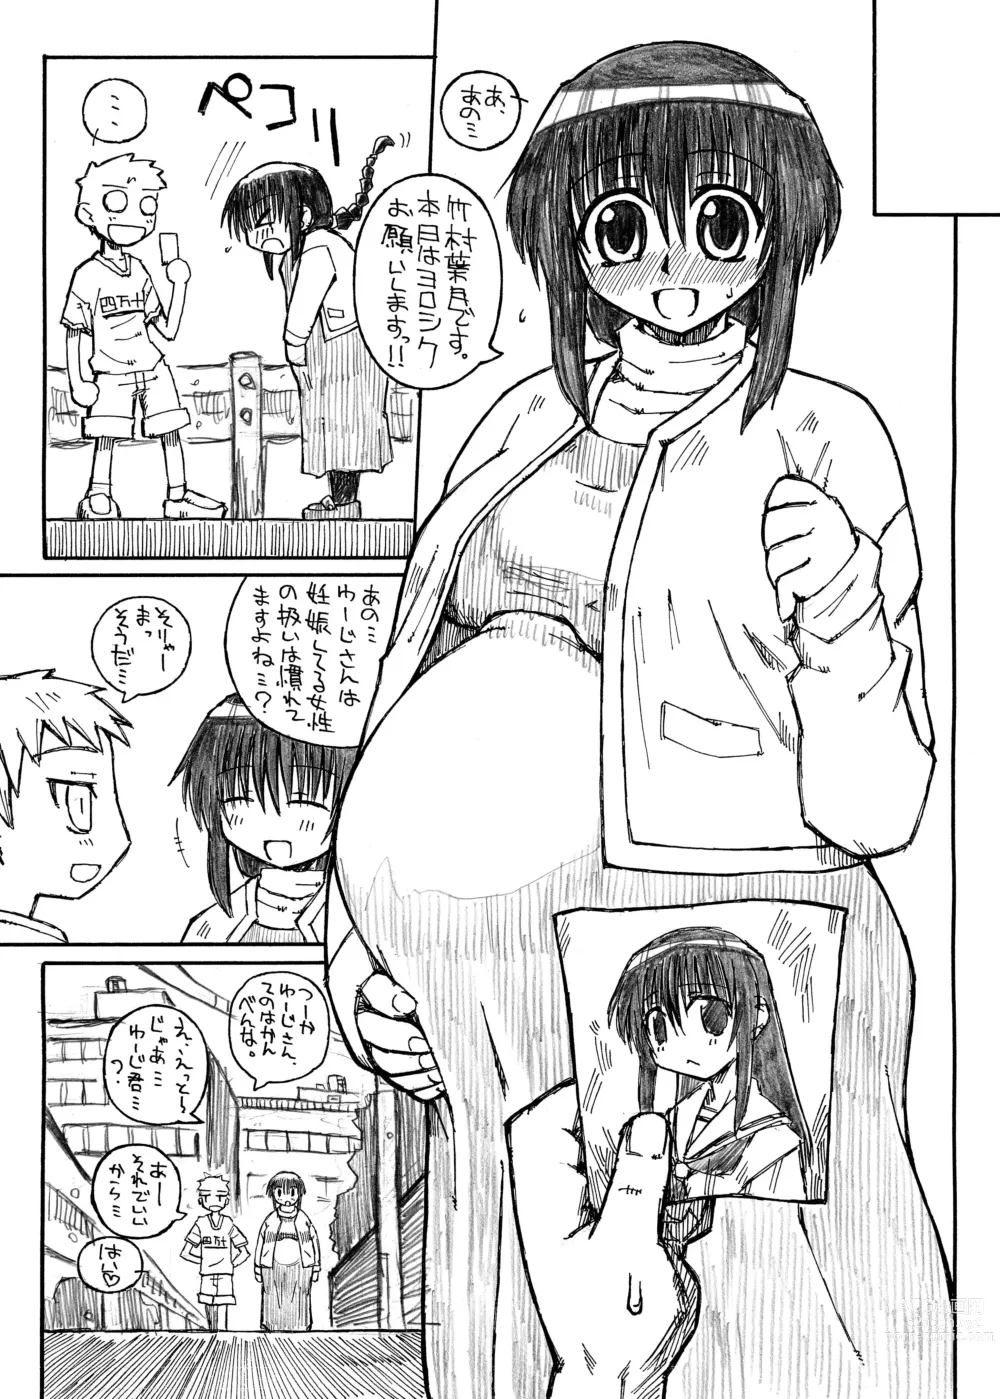 Page 13 of doujinshi Pregnant Summer